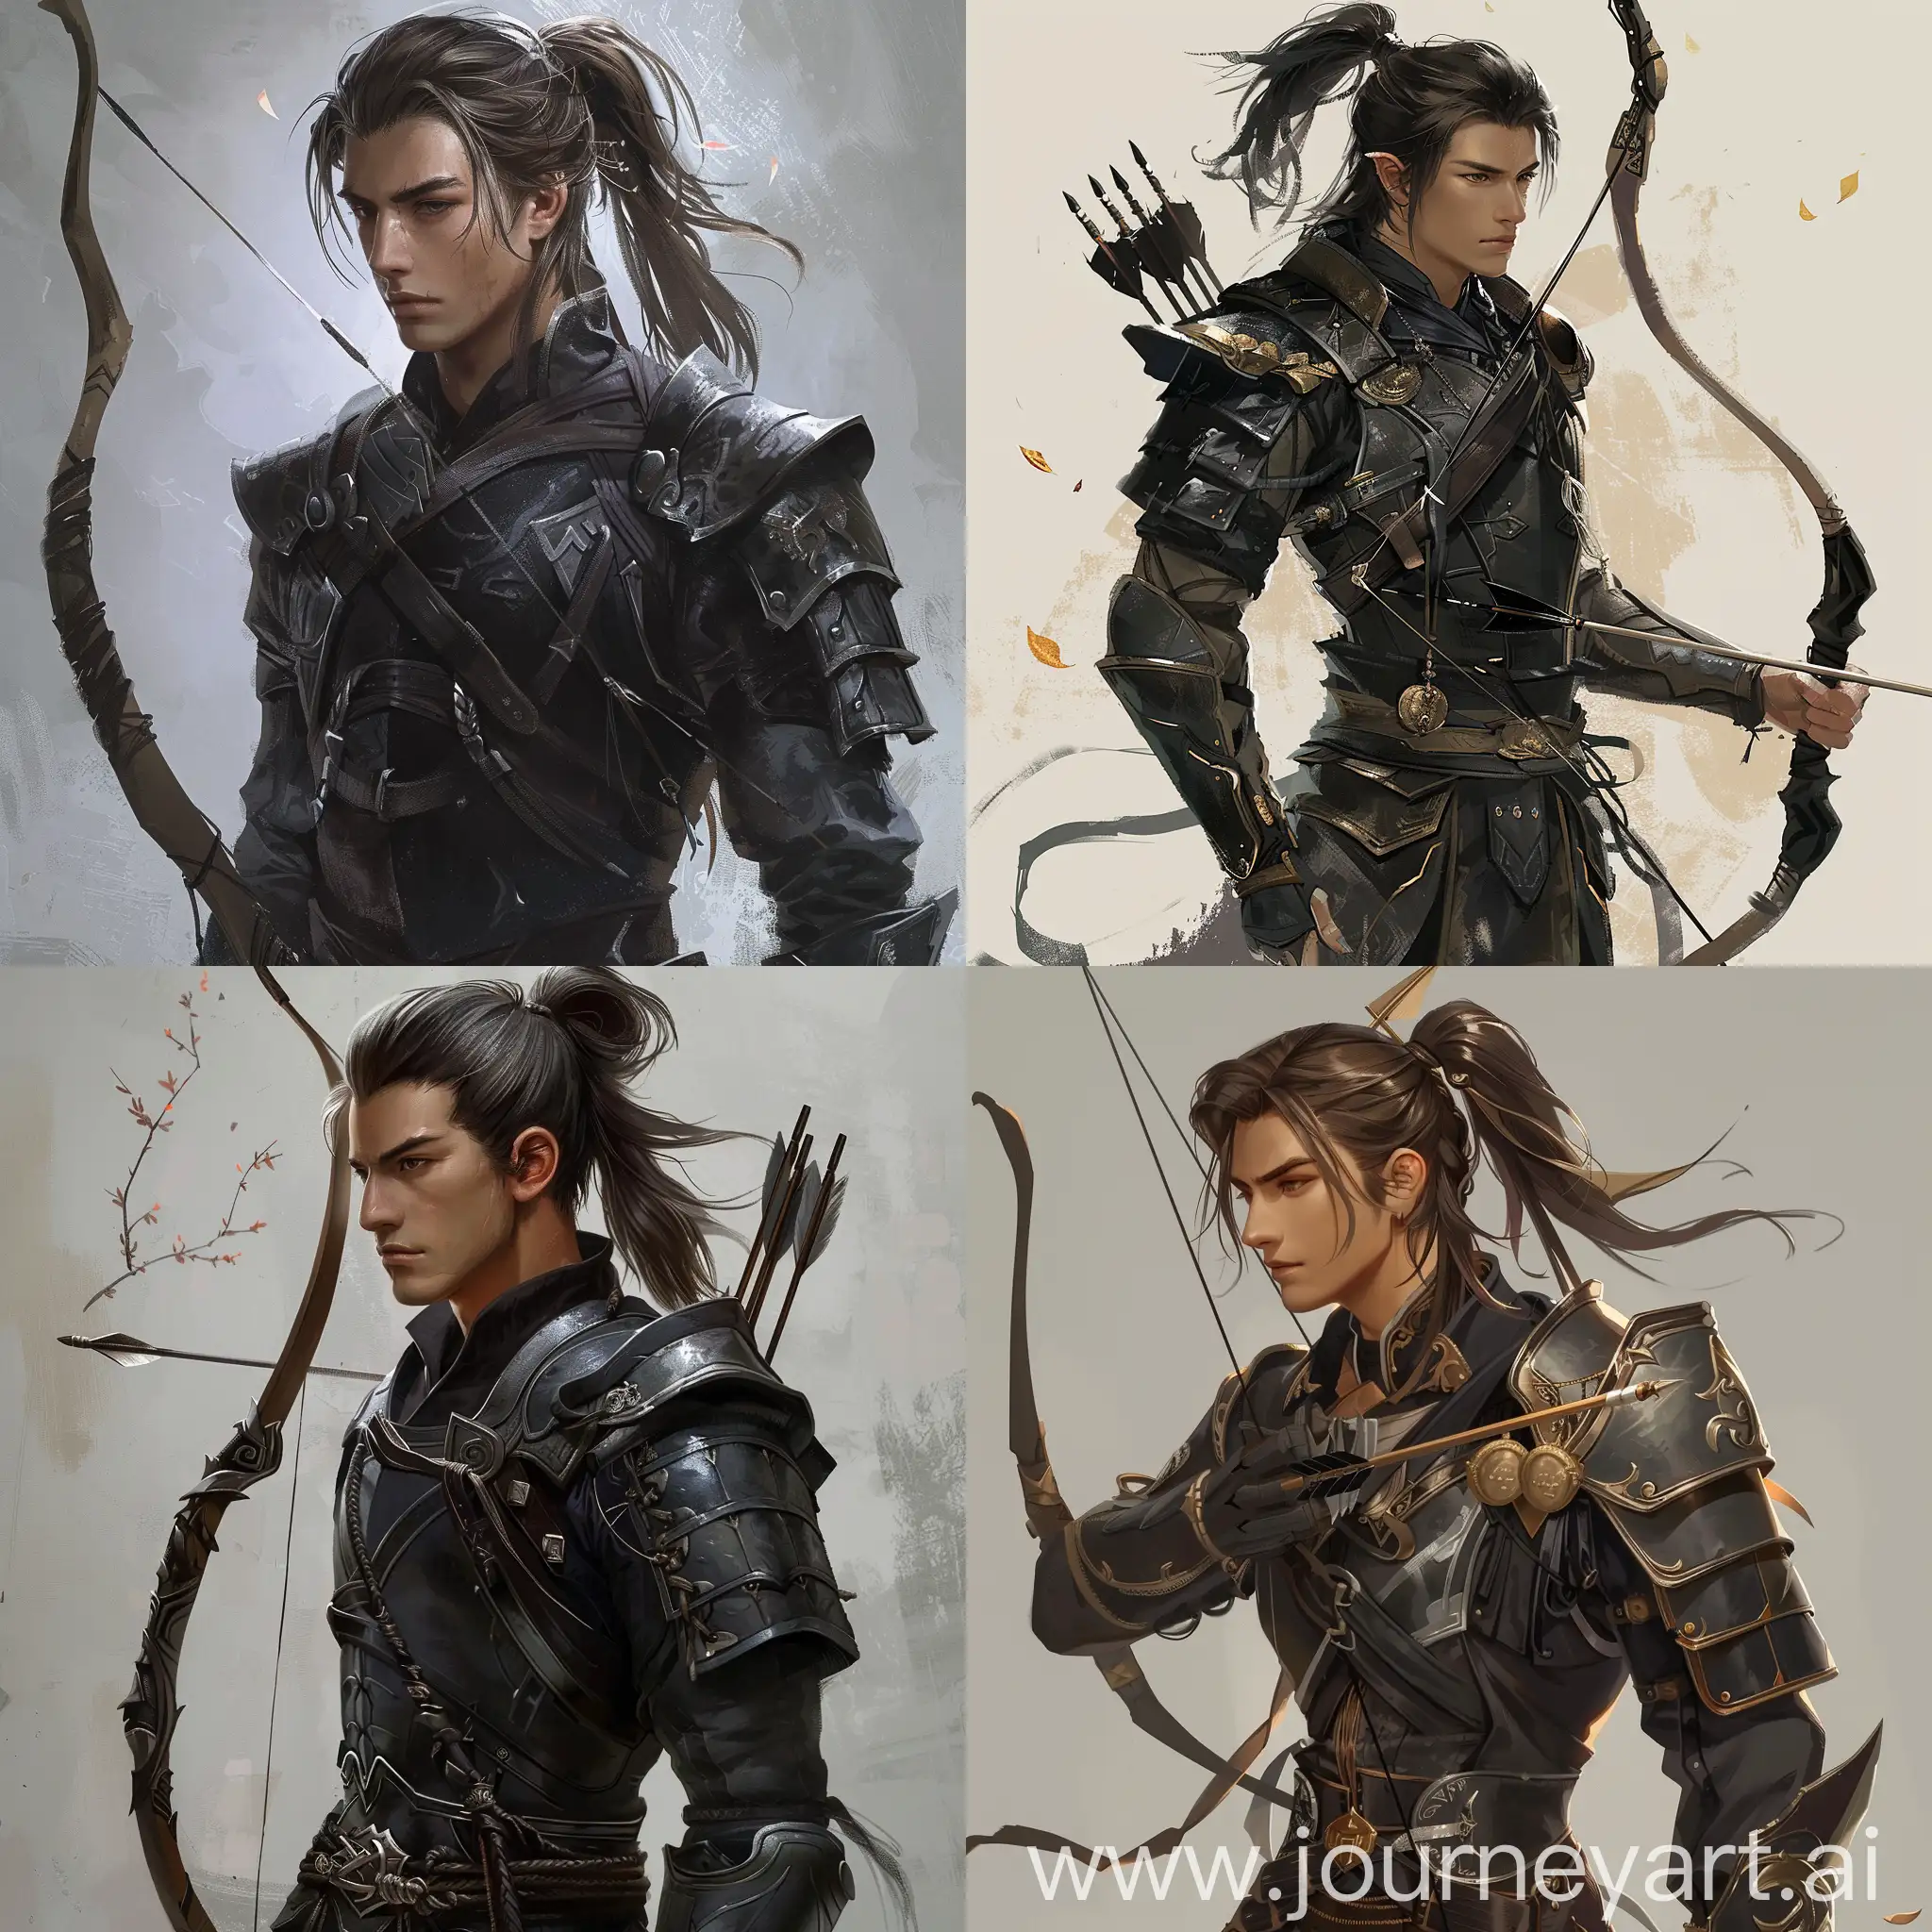 a fantasy archer member of a group called Shadow Lancer, wears a light armor in black, he's a male human with ponytailed hair